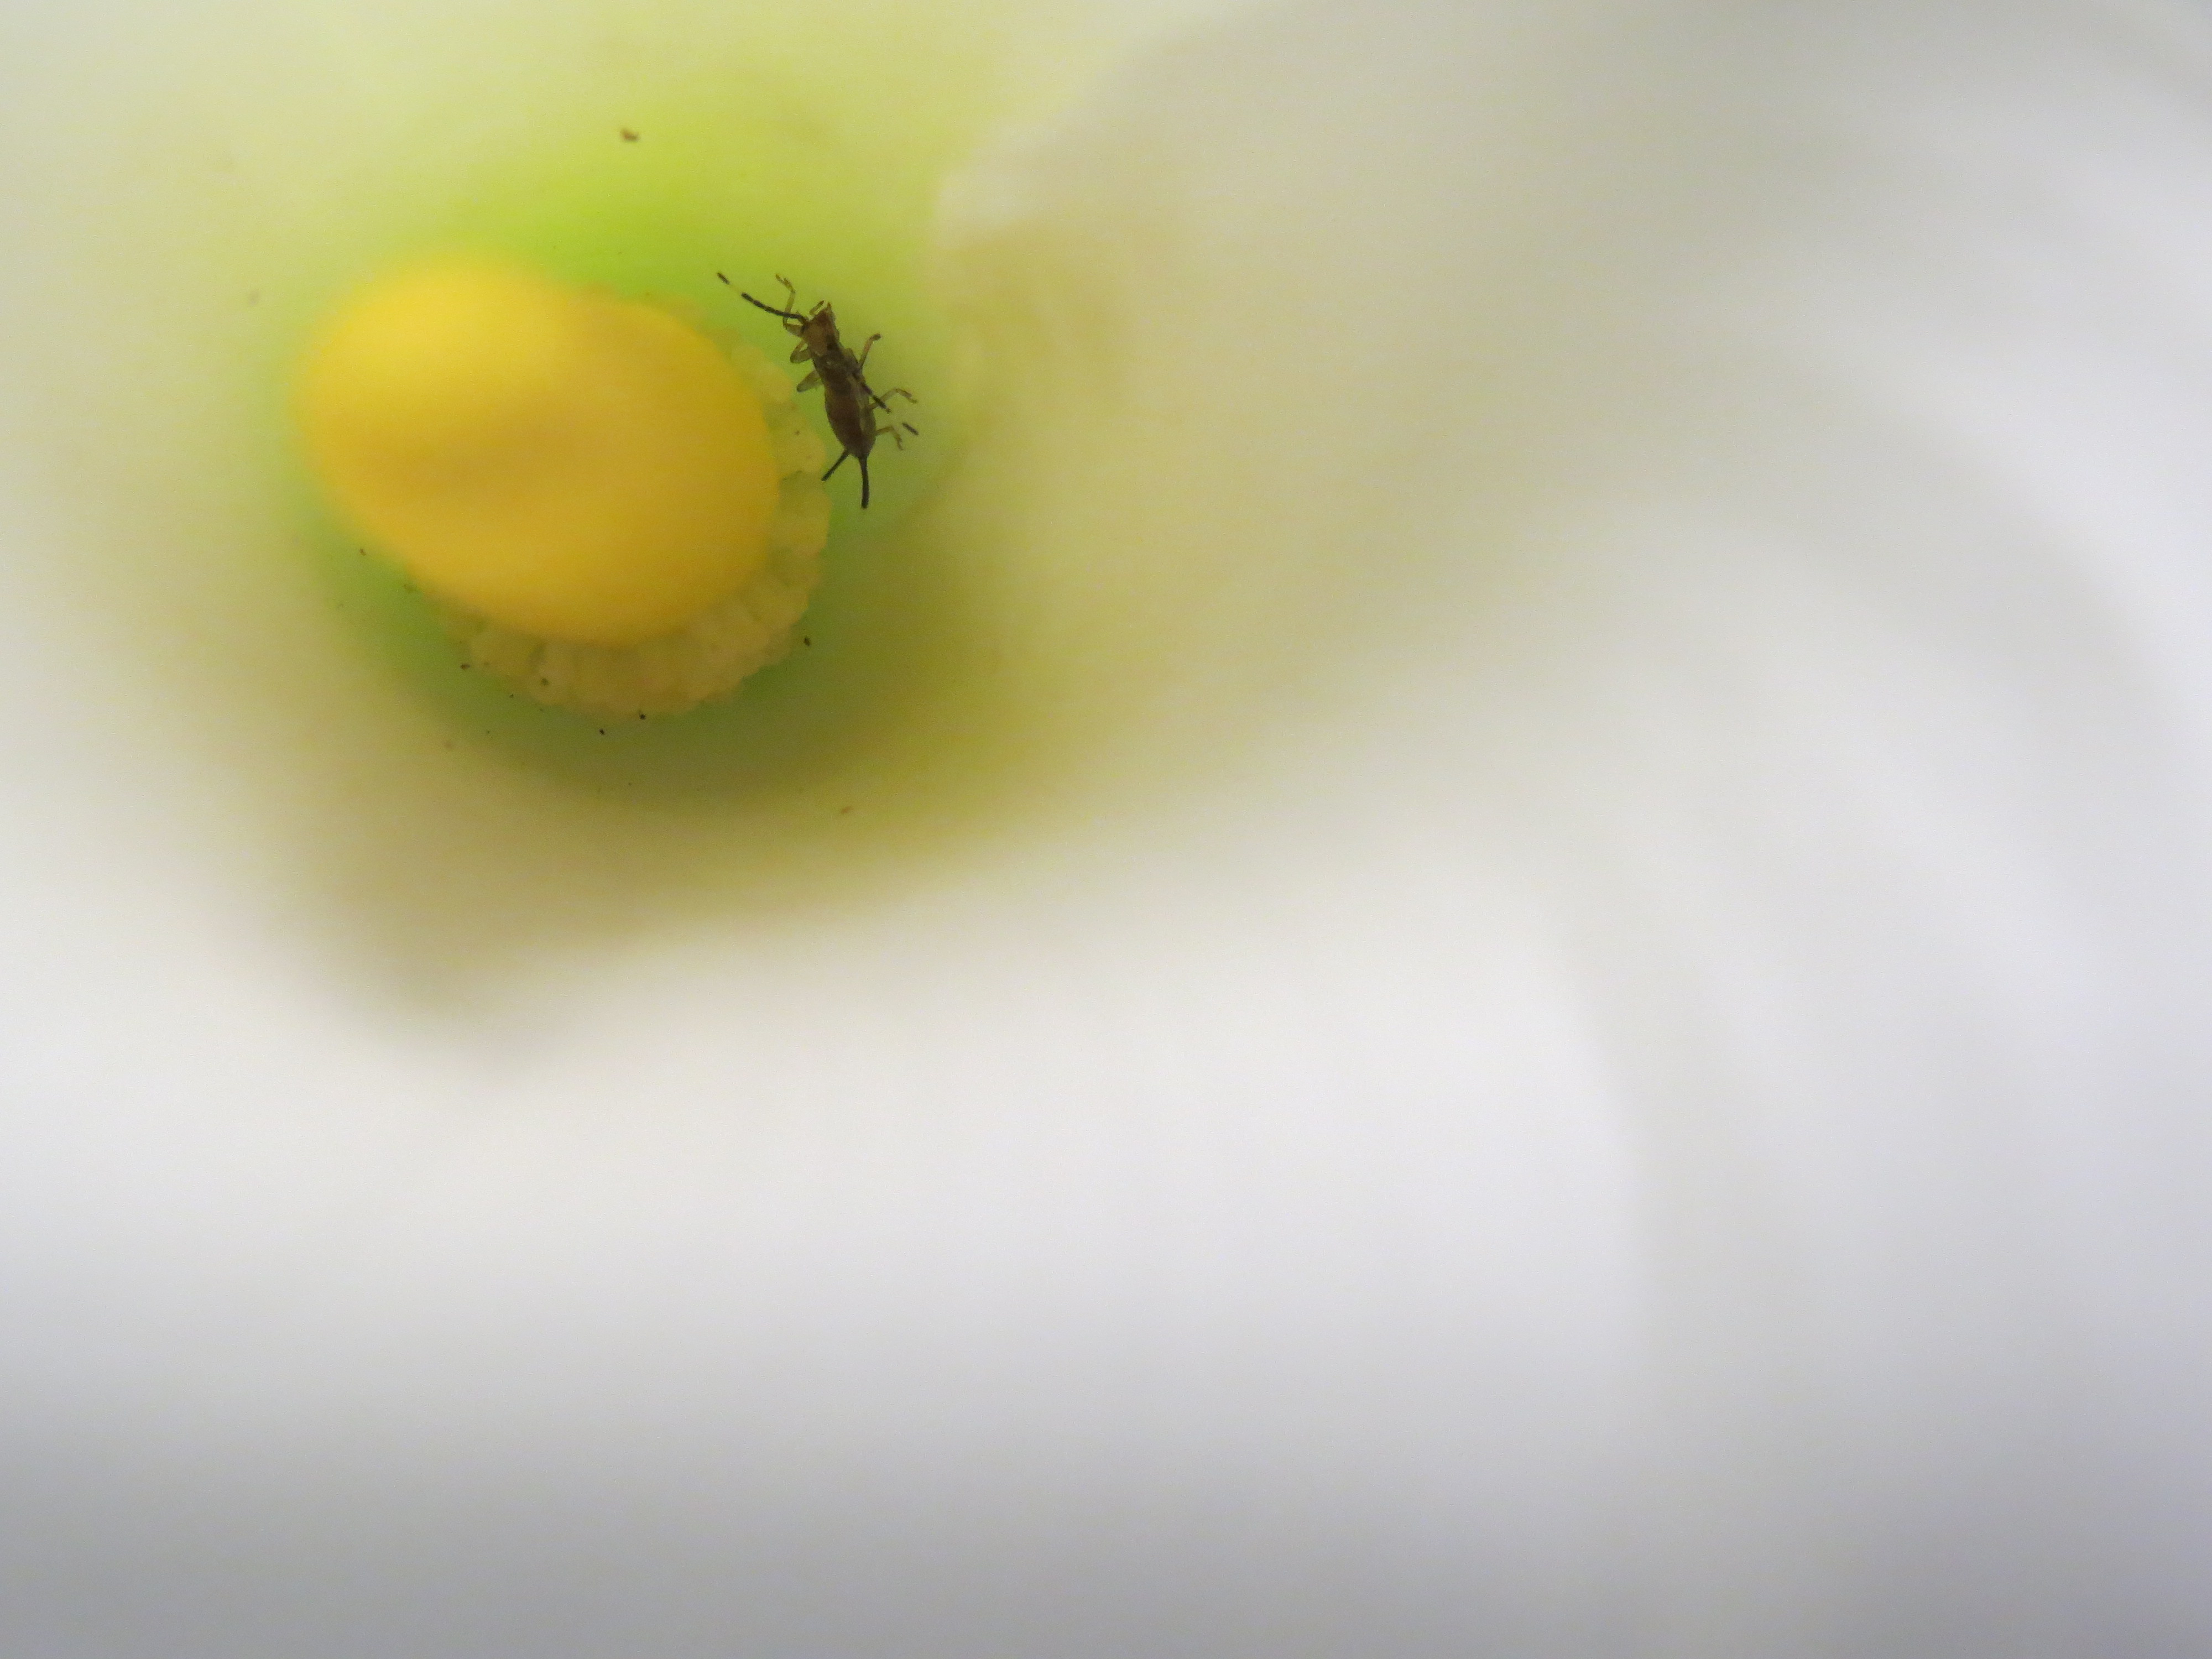 Calla lily with an earwig photo